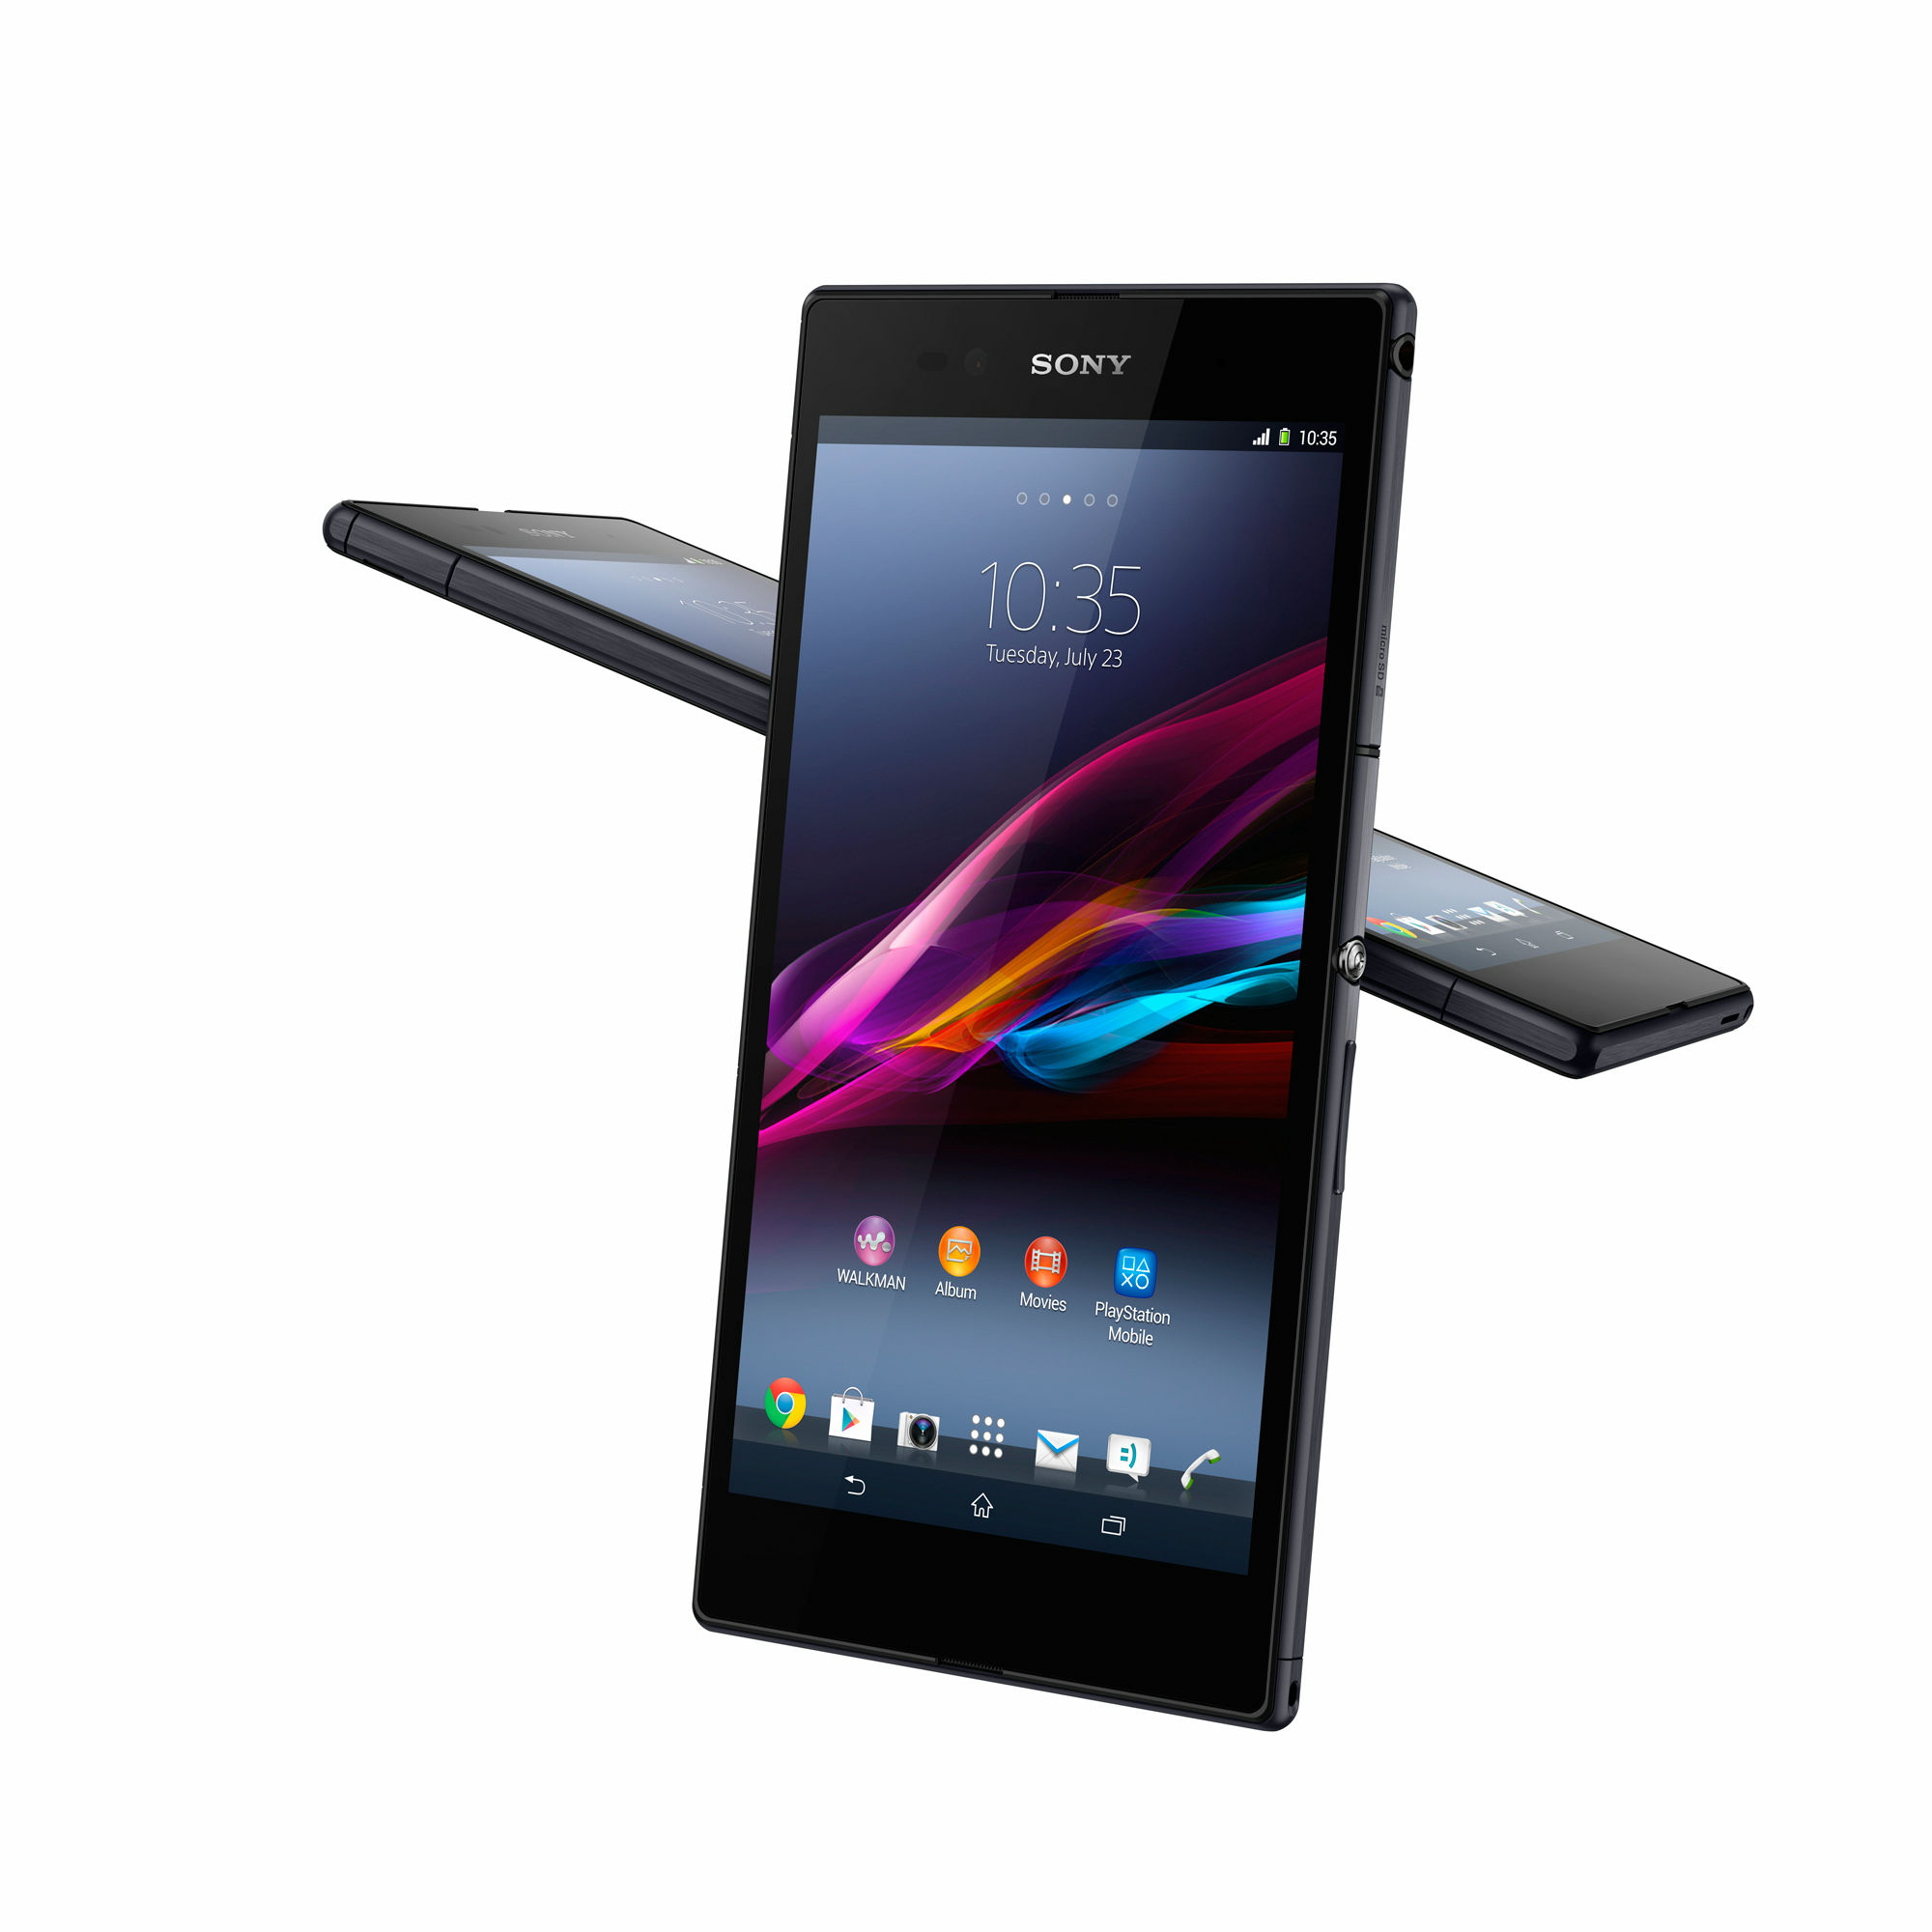 World's thinnest about 6.5 mm & 6.4 inch display Waterproof dustproof smartphone "Xperia Z be released this summer - GIGAZINE